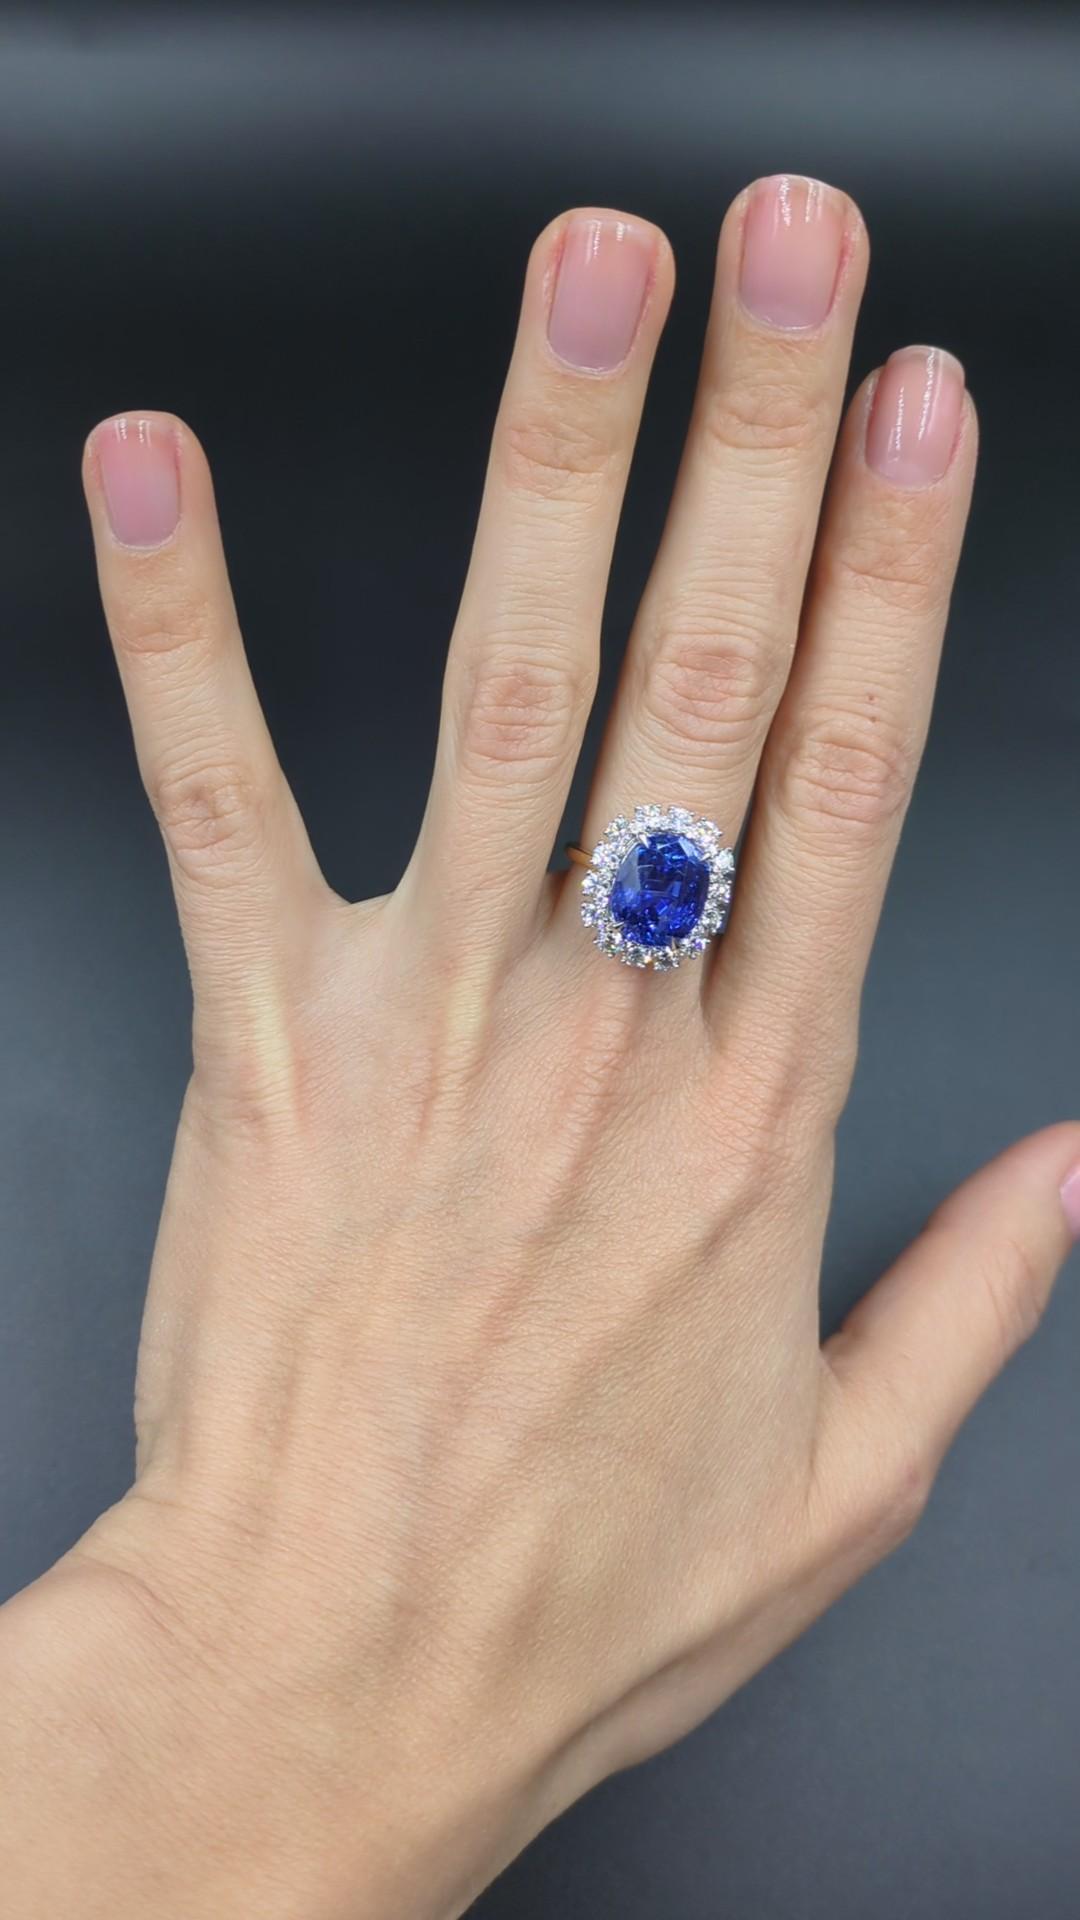 10.21 Carat Natural Blue Ceylon Sapphire Ring and Diamond Ring For Sale 1